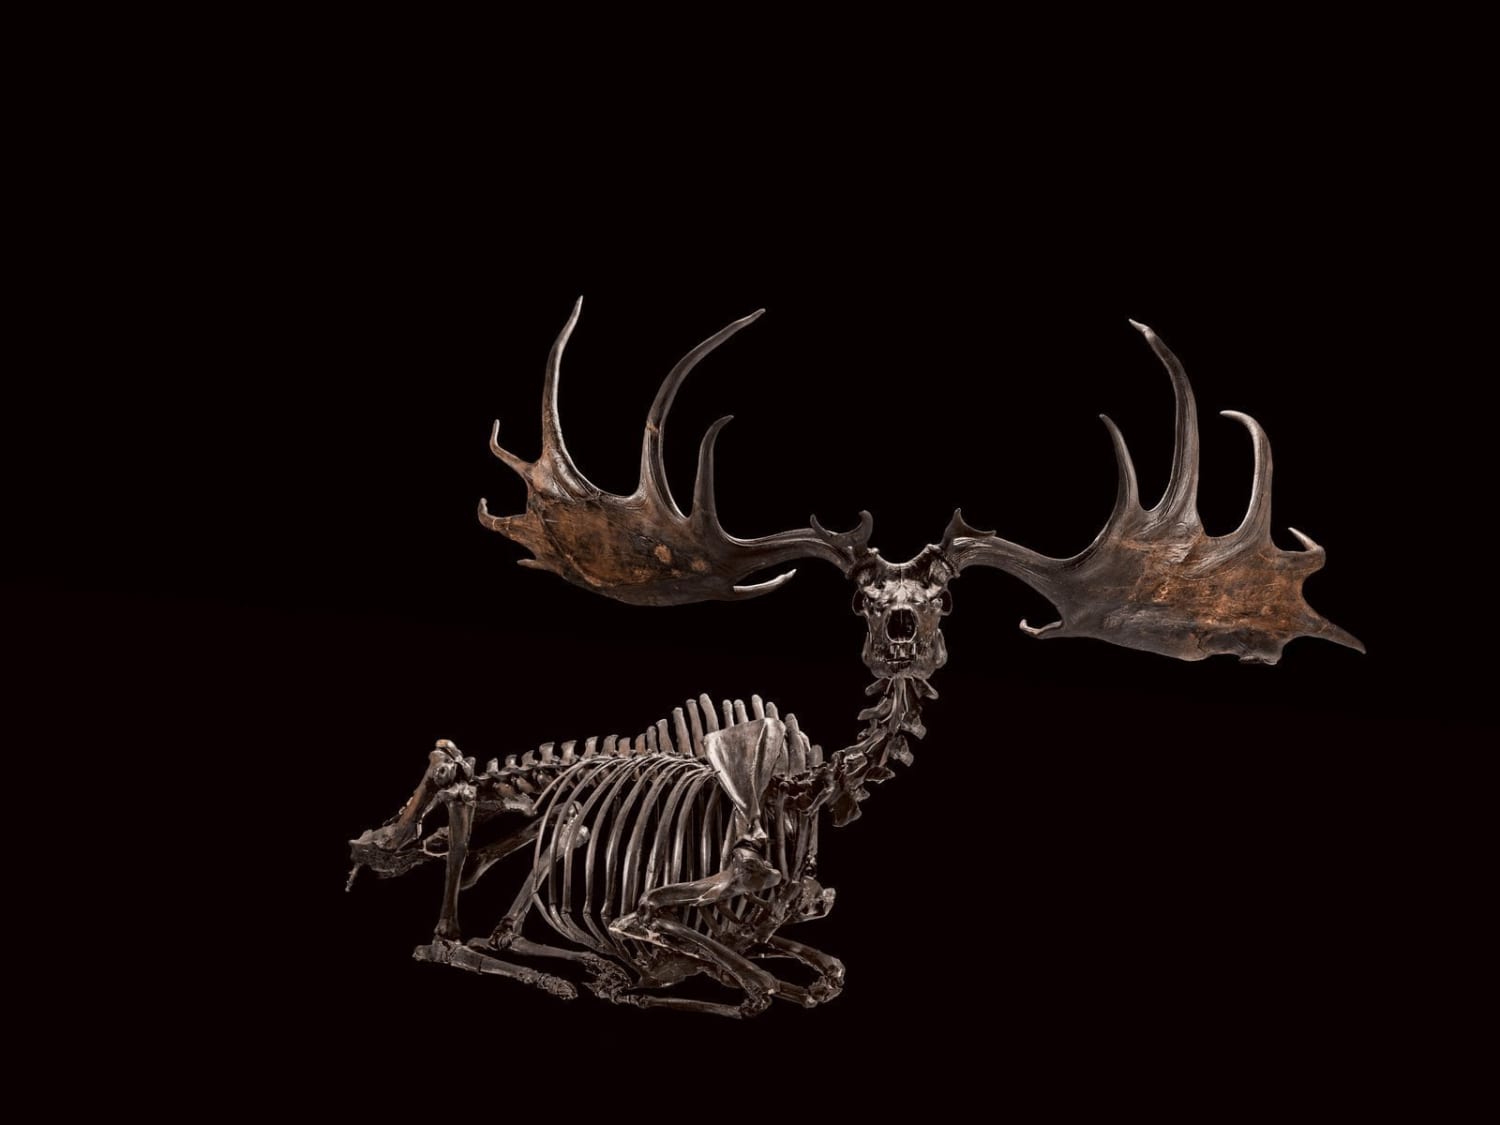 The extinct Irish elk had the biggest antlers EVER. And you know what they say about big antlers...